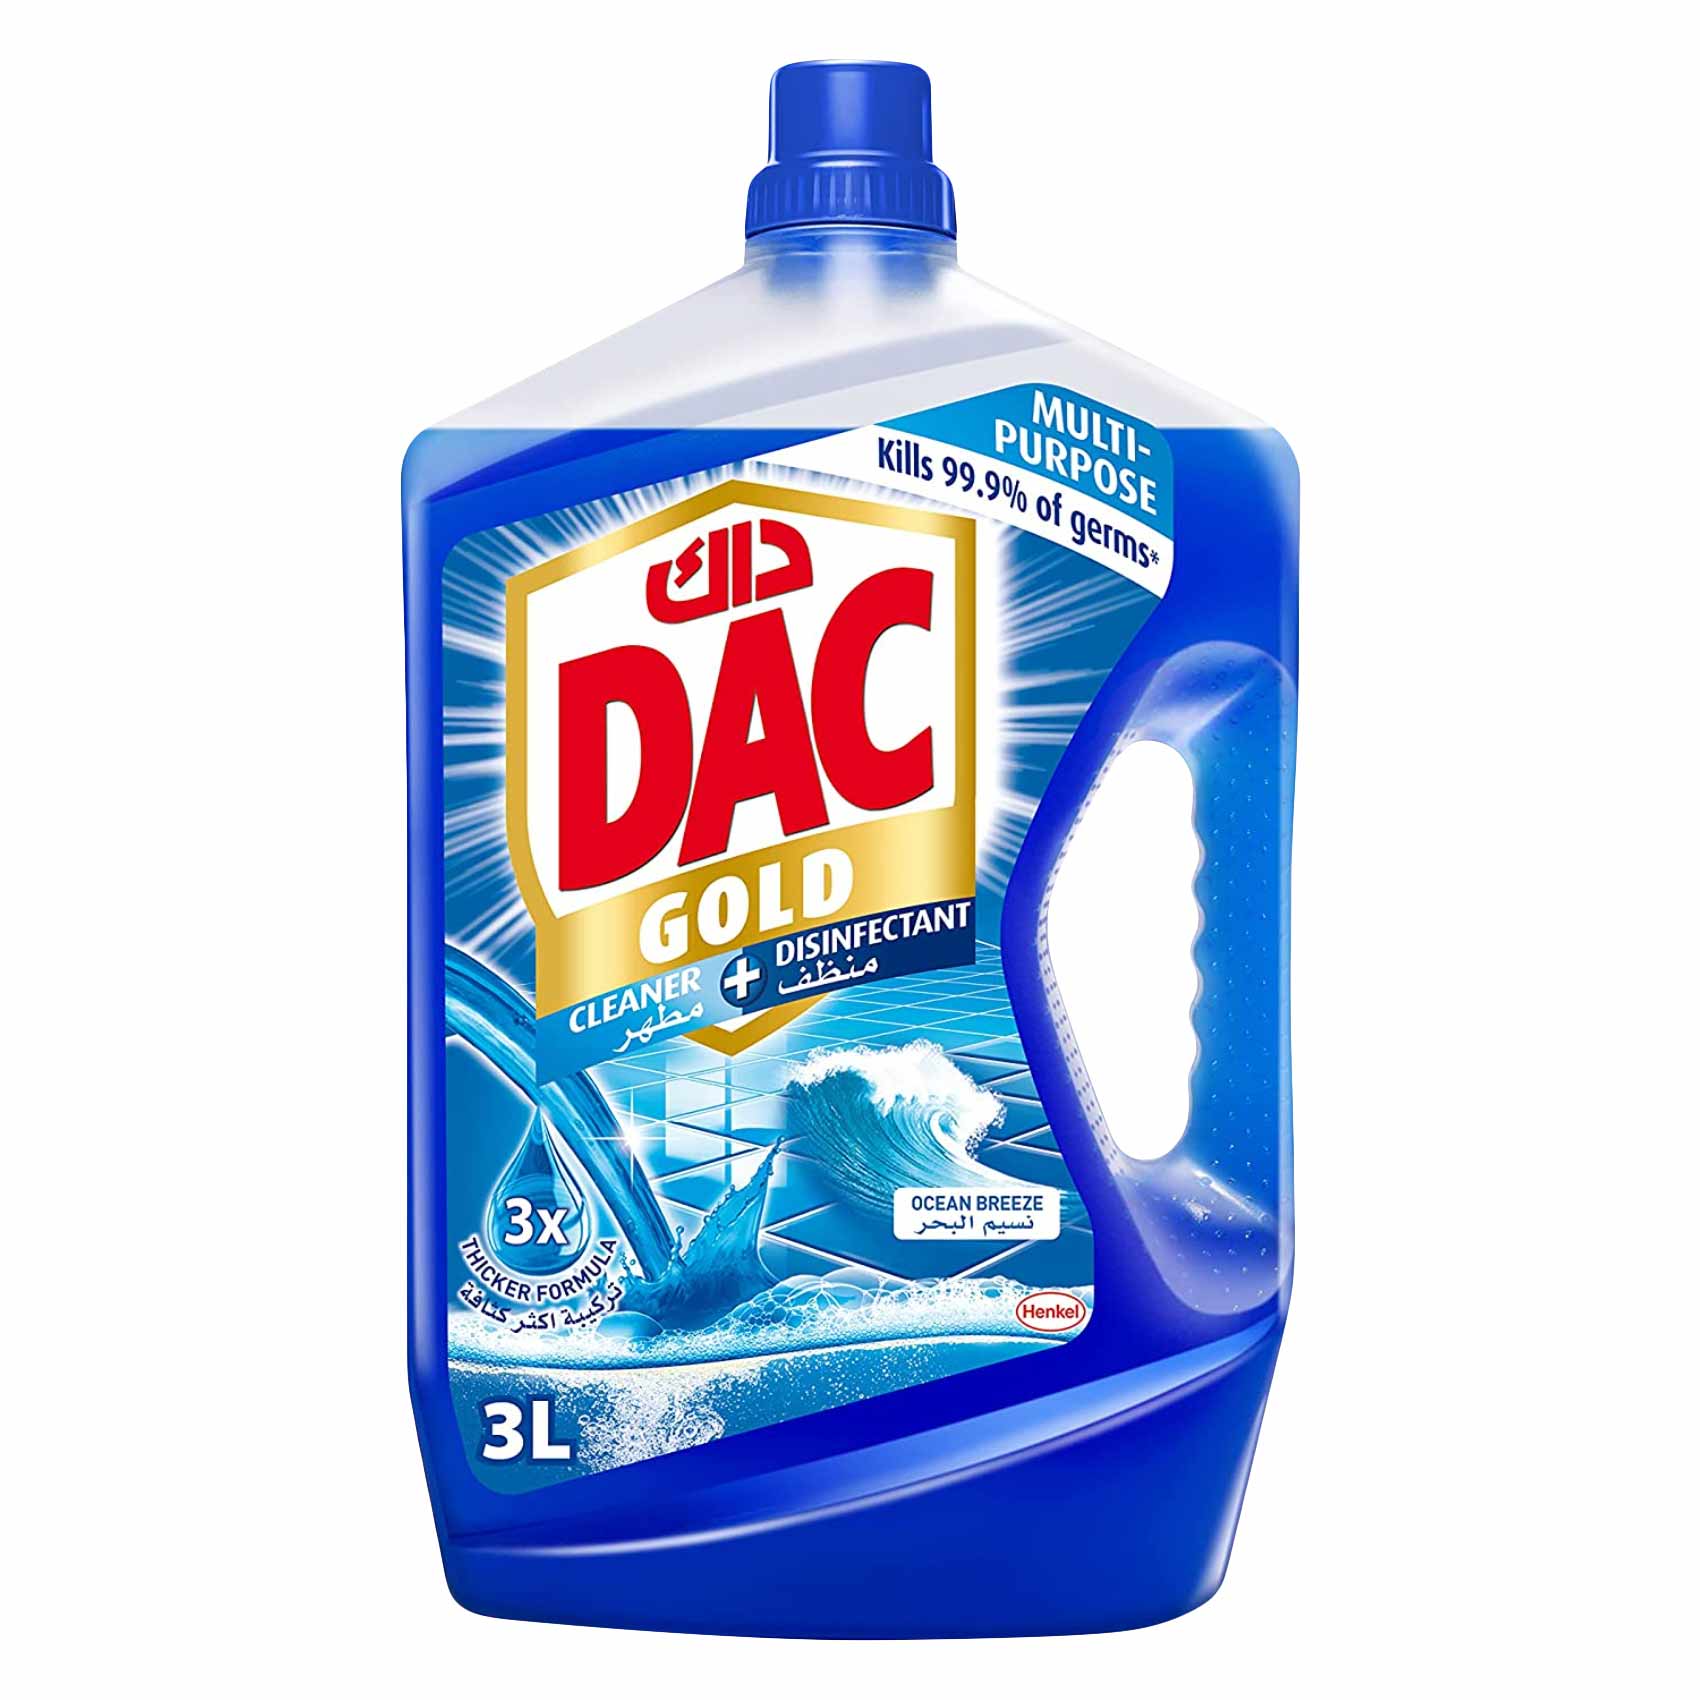 DAC GOLD CLEANER+DISINFECTANT POWER FOAM STRONGEST CLEANING LONG LASTING SCENT 3L